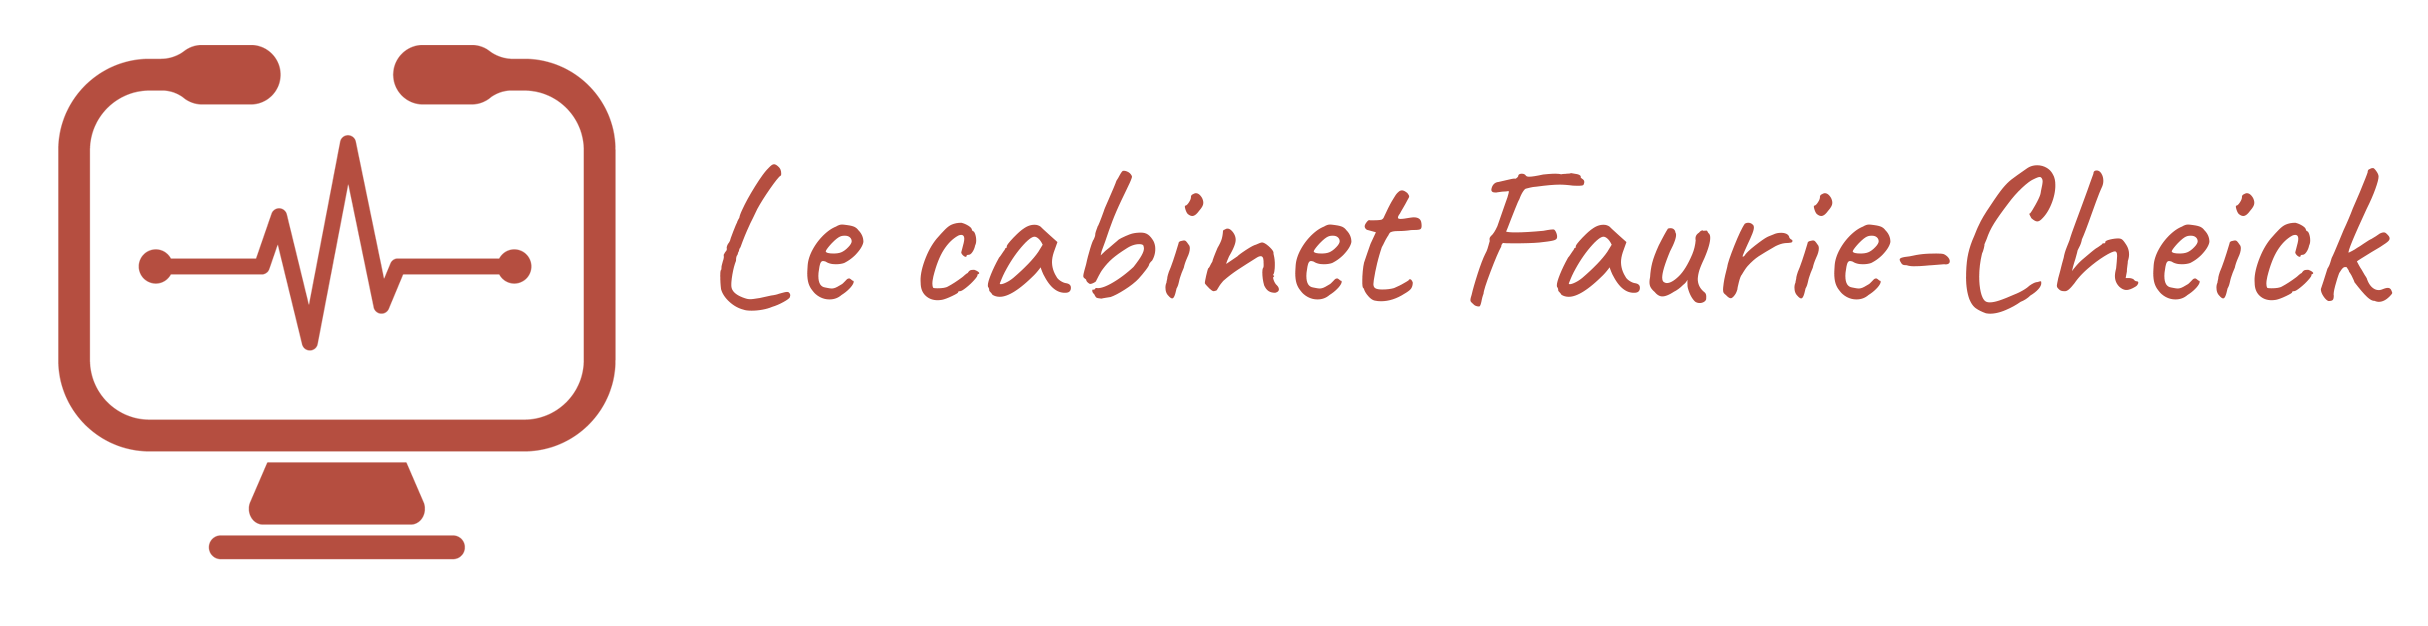 Cabinet infirmier FAURIE - CHEICK - Reims